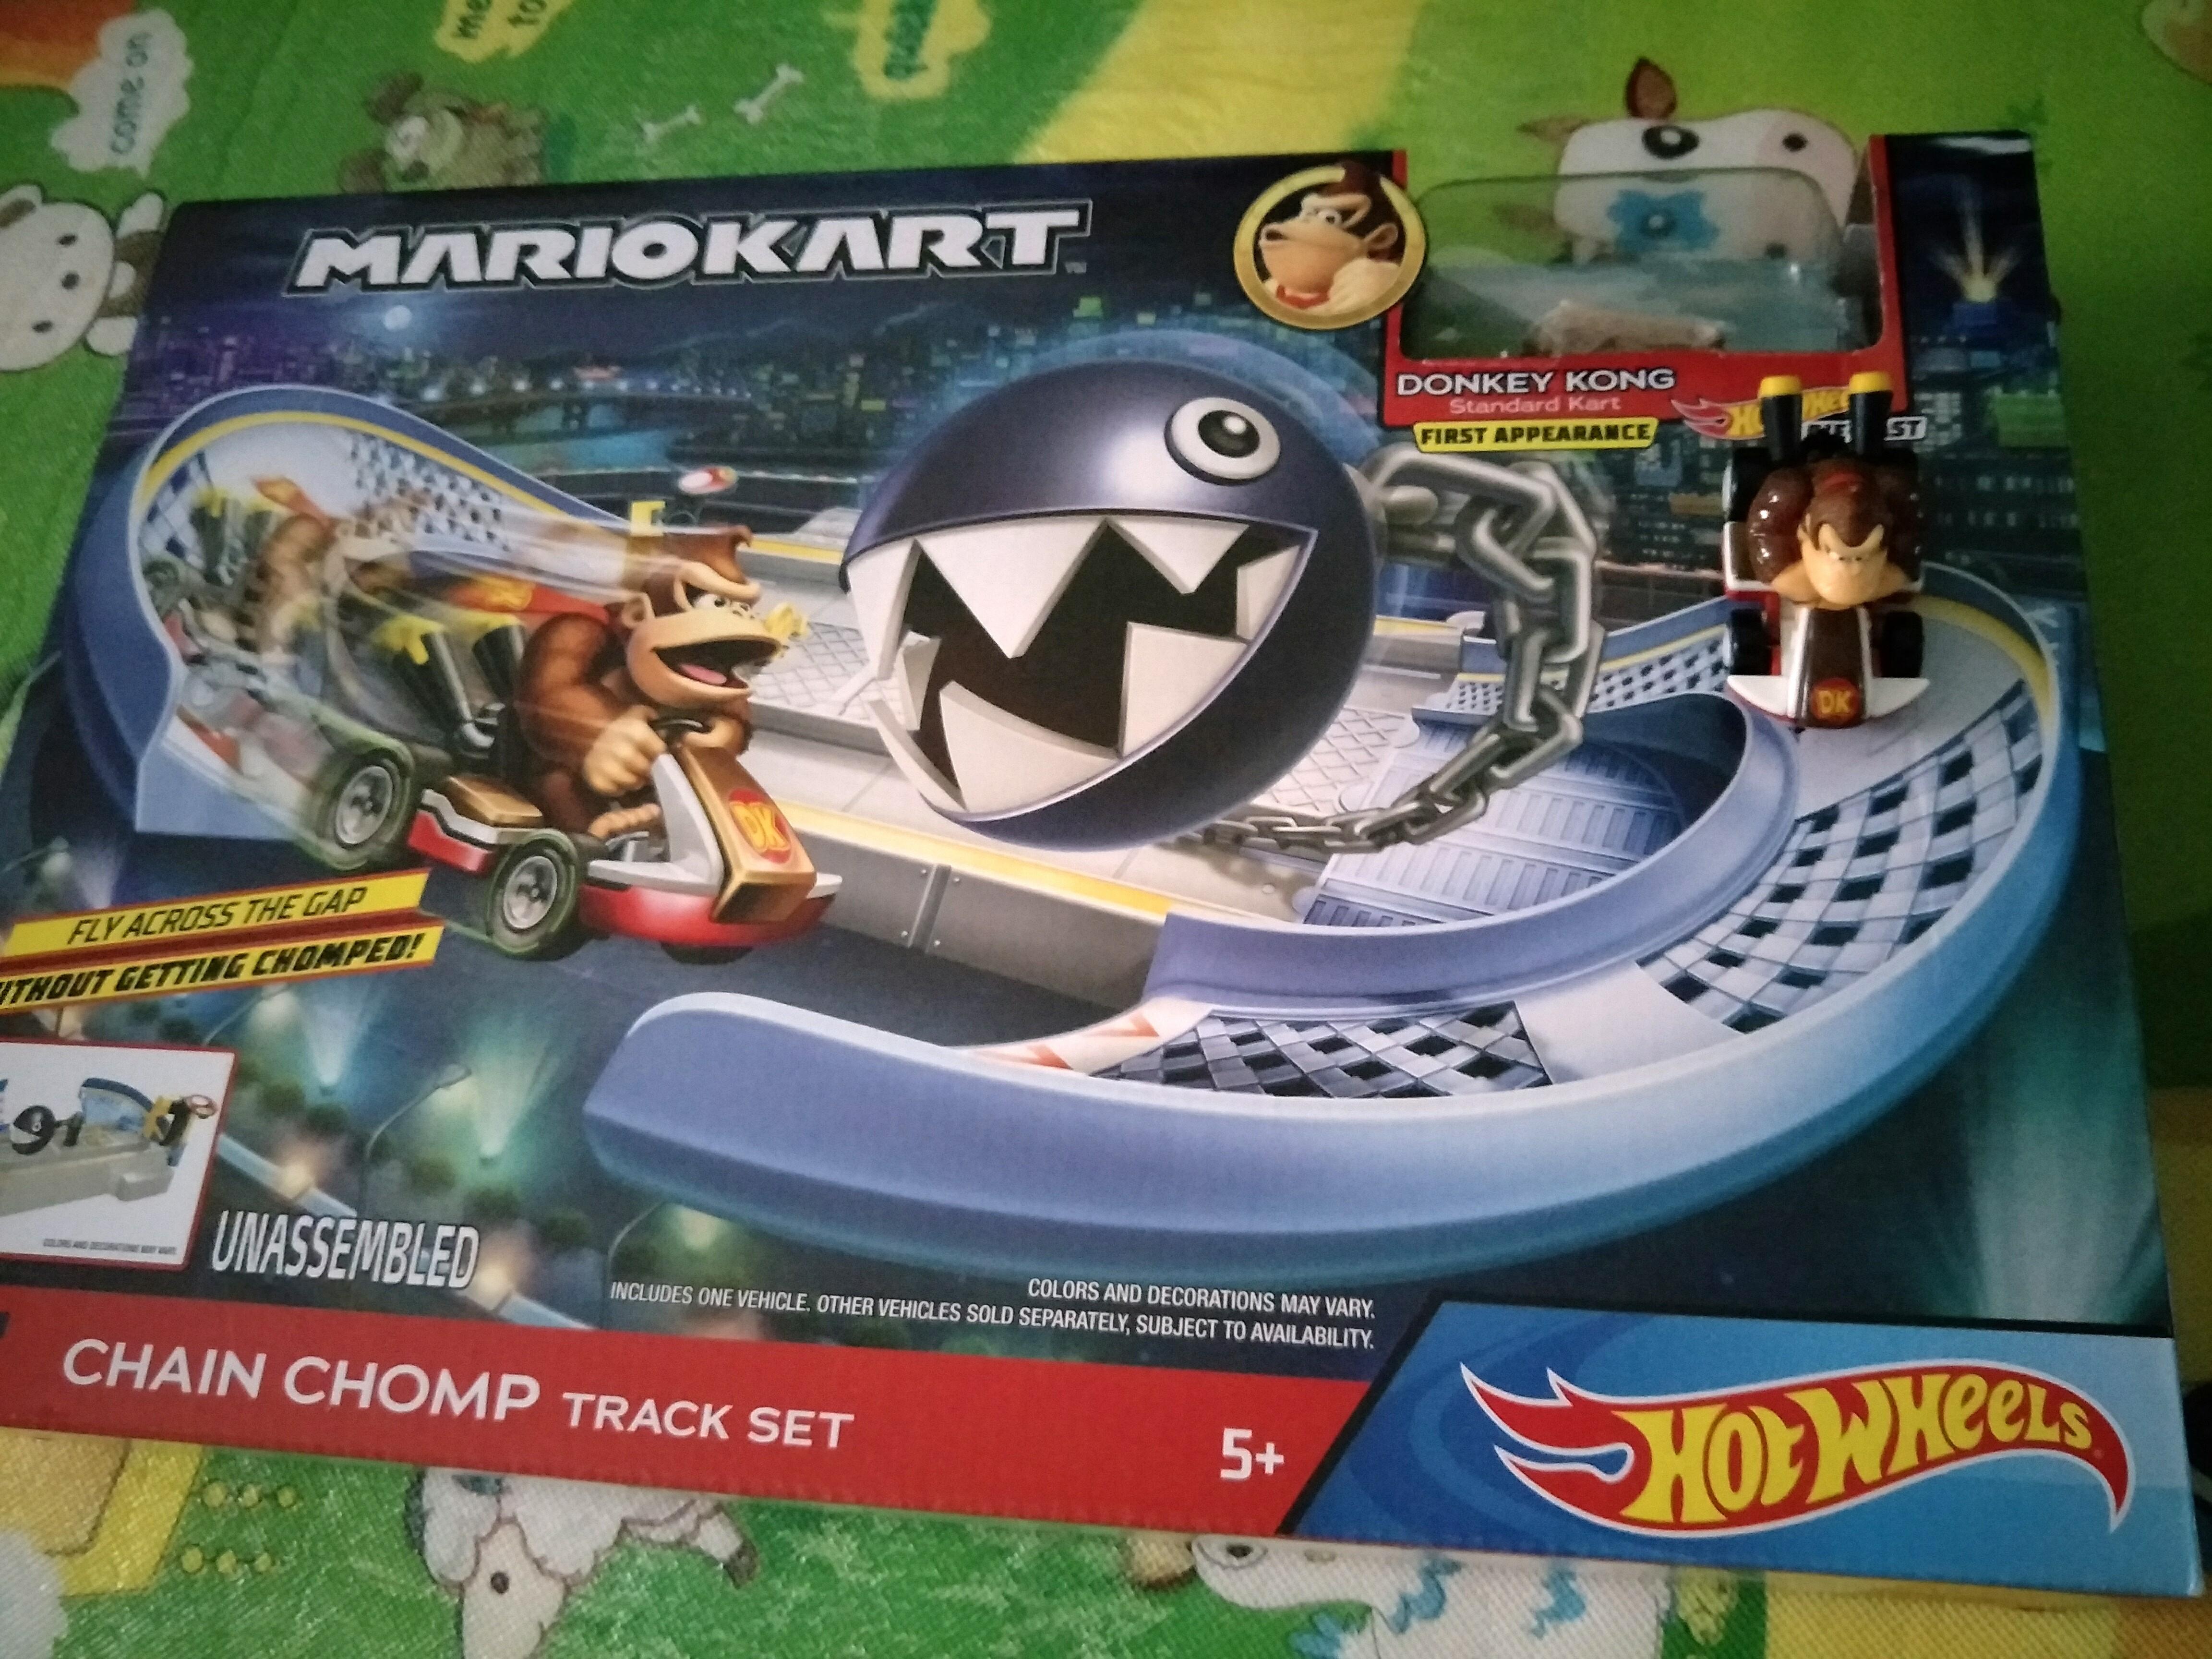 Hot Wheels Mario Kart Chain Chomp Track Set Donkey Kong First Appearance GKY48 for sale online 